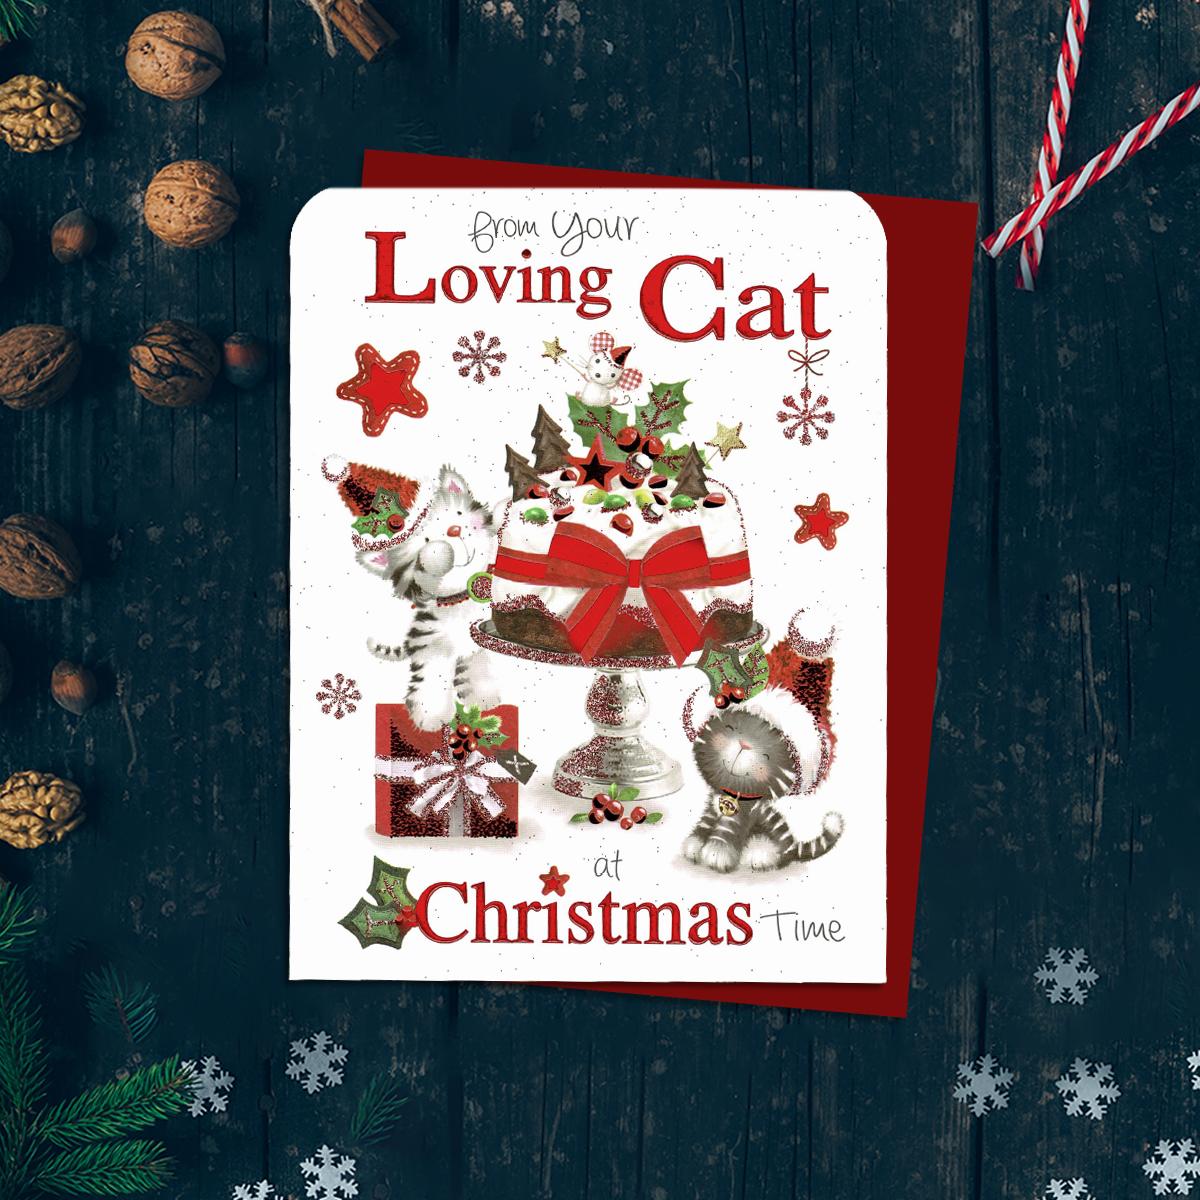 From Your Loving Cat At Christmas Time Featuring Two Cats And A Mouse Around A Large Christmas Cake! Finished With Red Foil Lettering, Red Glitter Detail And Red Envelope